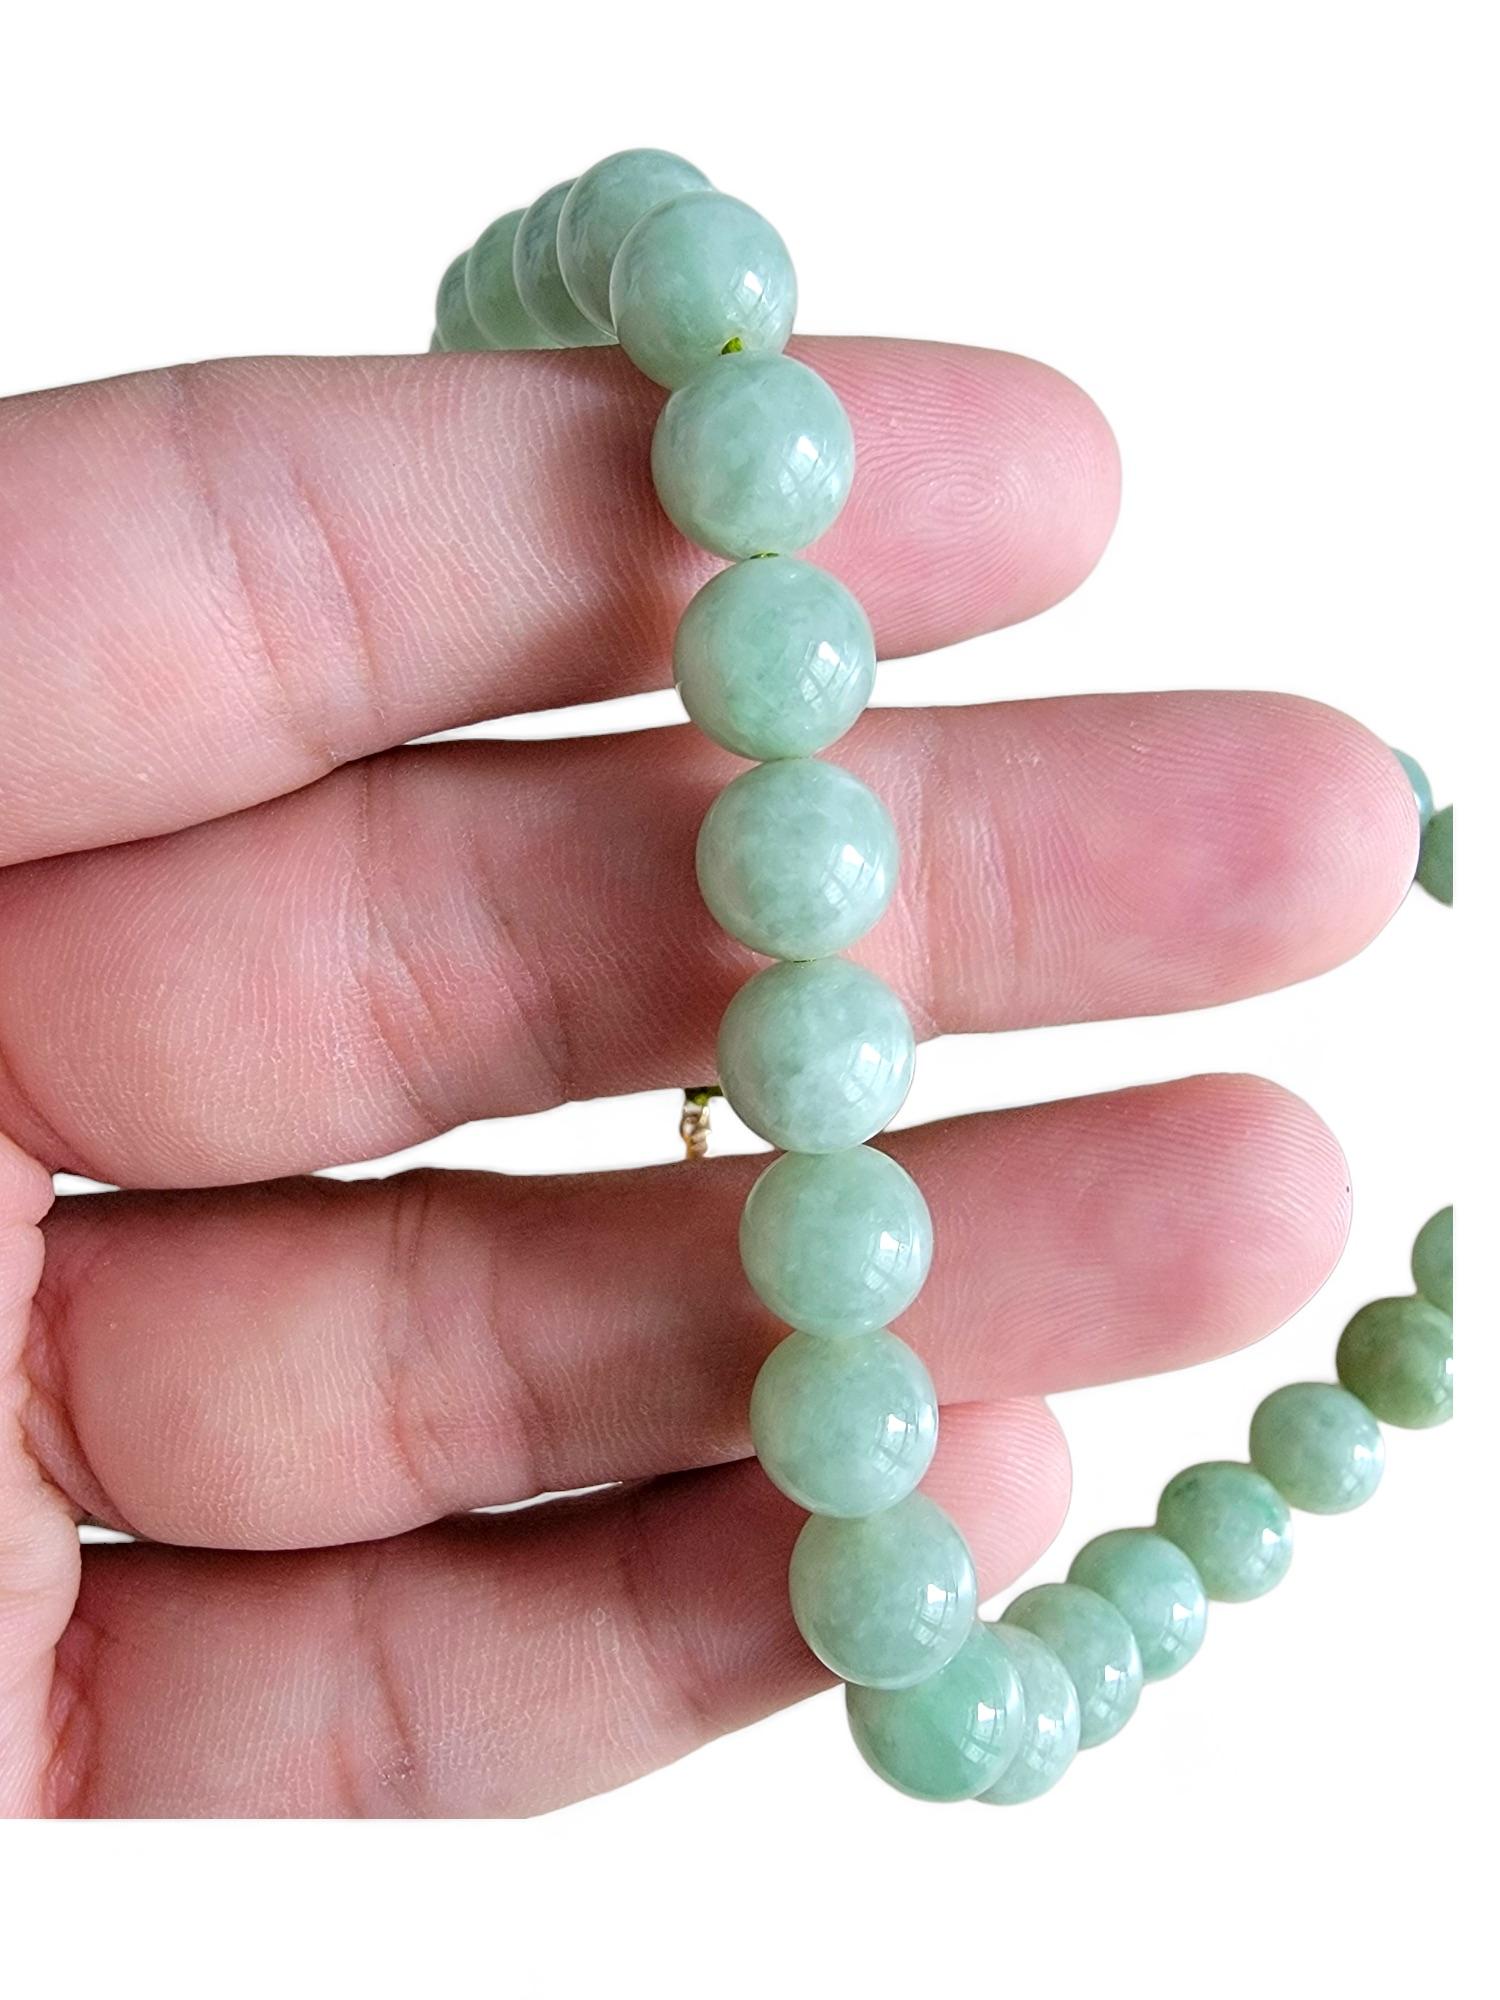 Imperial Green Burmese A-Jade Beaded Necklace (10mm Each x 42 beads) 10001 In New Condition For Sale In Kowloon, HK